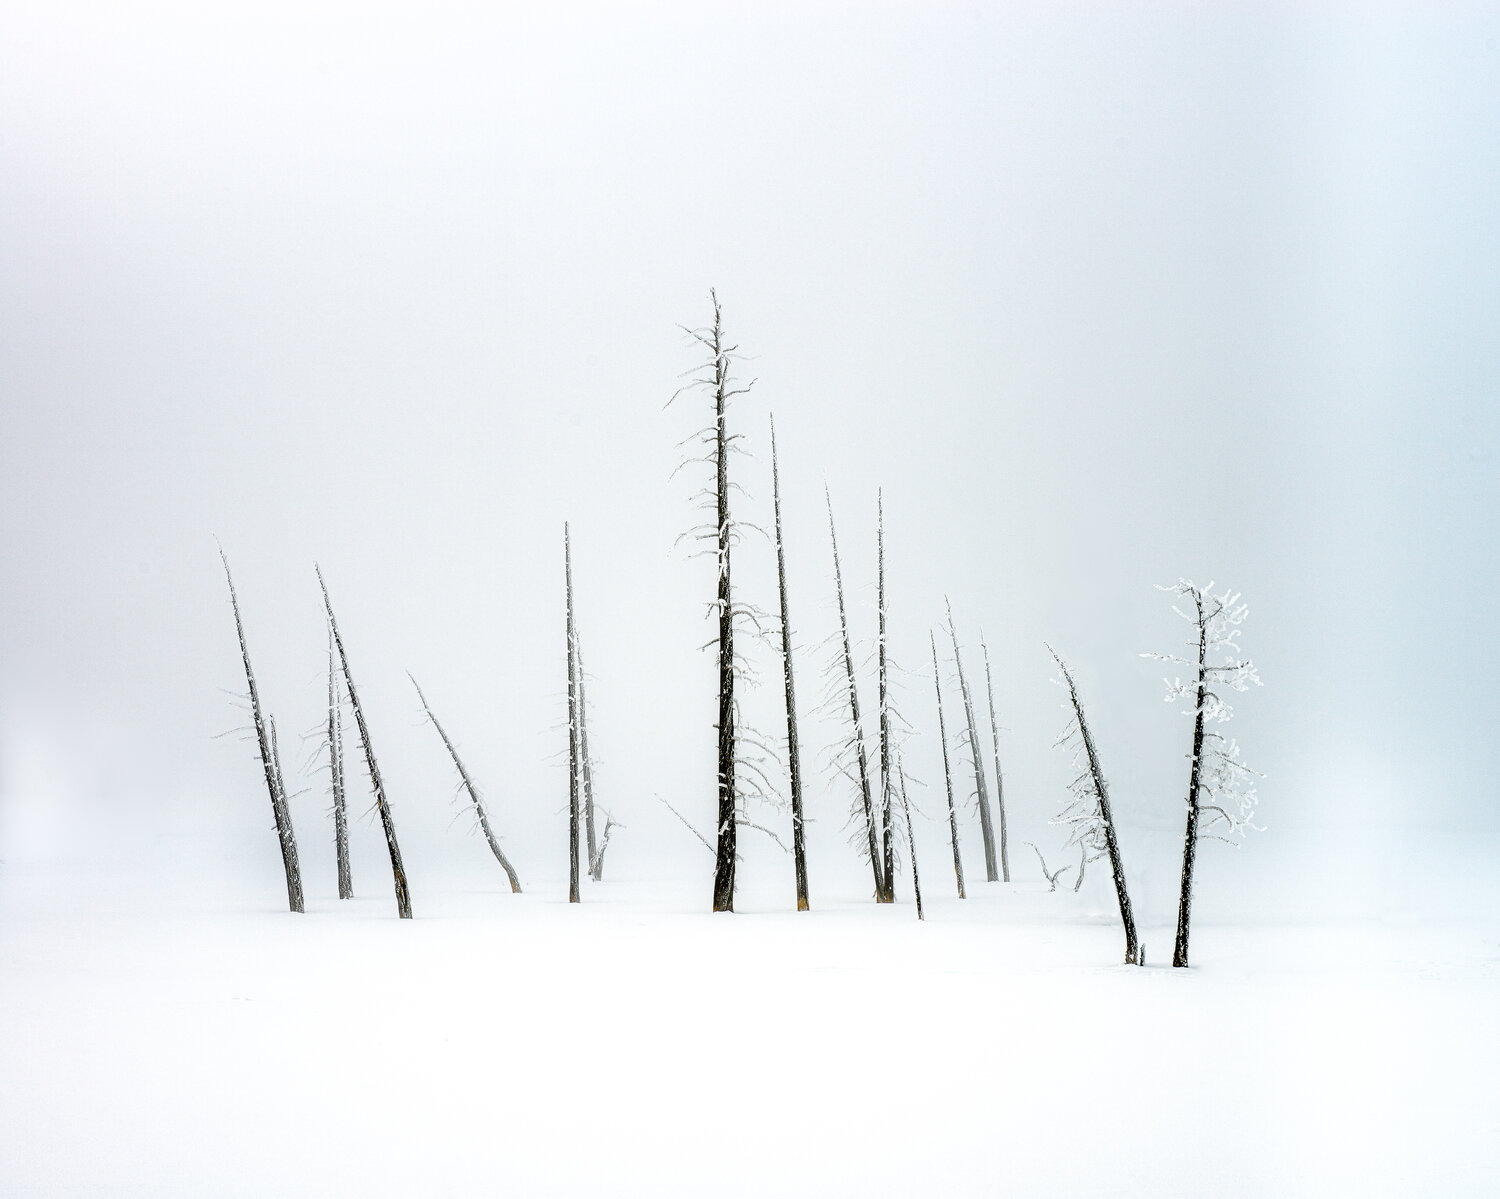 Dead Trees in Mist  Brian Clark   Nikon D800  Nikkor 28-70mm f2.8 57mm f11 1/60s ISO 100    brianclarkphotography.com   This image was made in Yellowstone National Park on a February morning when the temperature was minus 20C. The early morning mist initially shrouded everything but gradually it cleared to reveal this stark minimalist scene.  “A truly minimalistic yet strong composition that caught my eye. This photograph is the embodiment of a perfect use of negative space. The absence of horizon challenges your sense of perspective which keeps you captivated and engaged.”   Cath Simard   "This a beautifully composed image, I particularly liked the soft transition of tones from a soft blue to the whites of the snow. The composition has been carefully considered, each branch neatly separated from each other, with the hint of mist in the background finishing it off nicely. A superb minimalist image."  Stuart  McGlennon